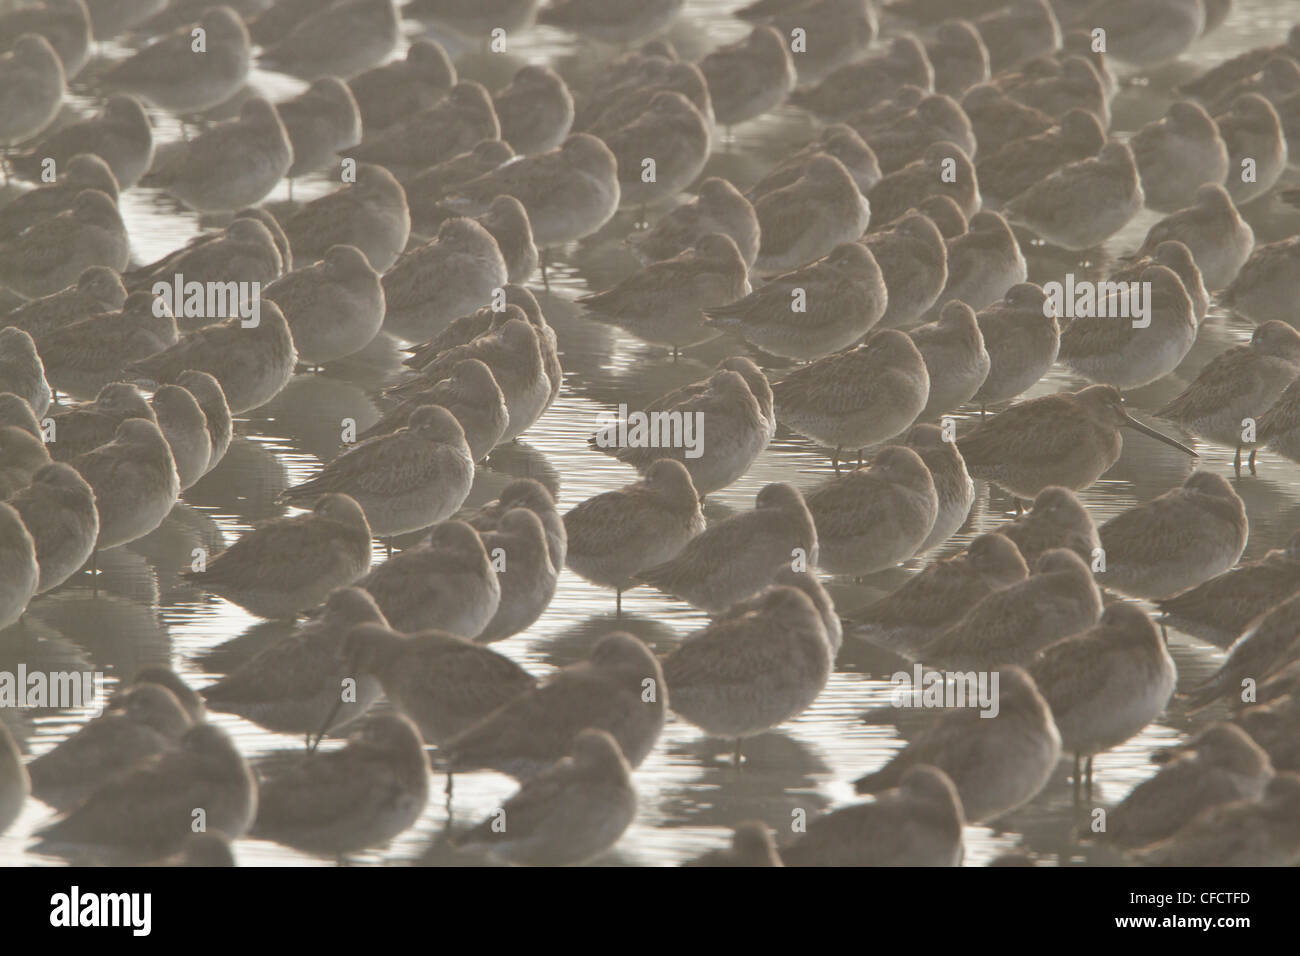 Short-billed Dowitcher (Limnodromus griseus) and other shorebirds in a wetland near Vancouver, British Columbia, Canada. Stock Photo